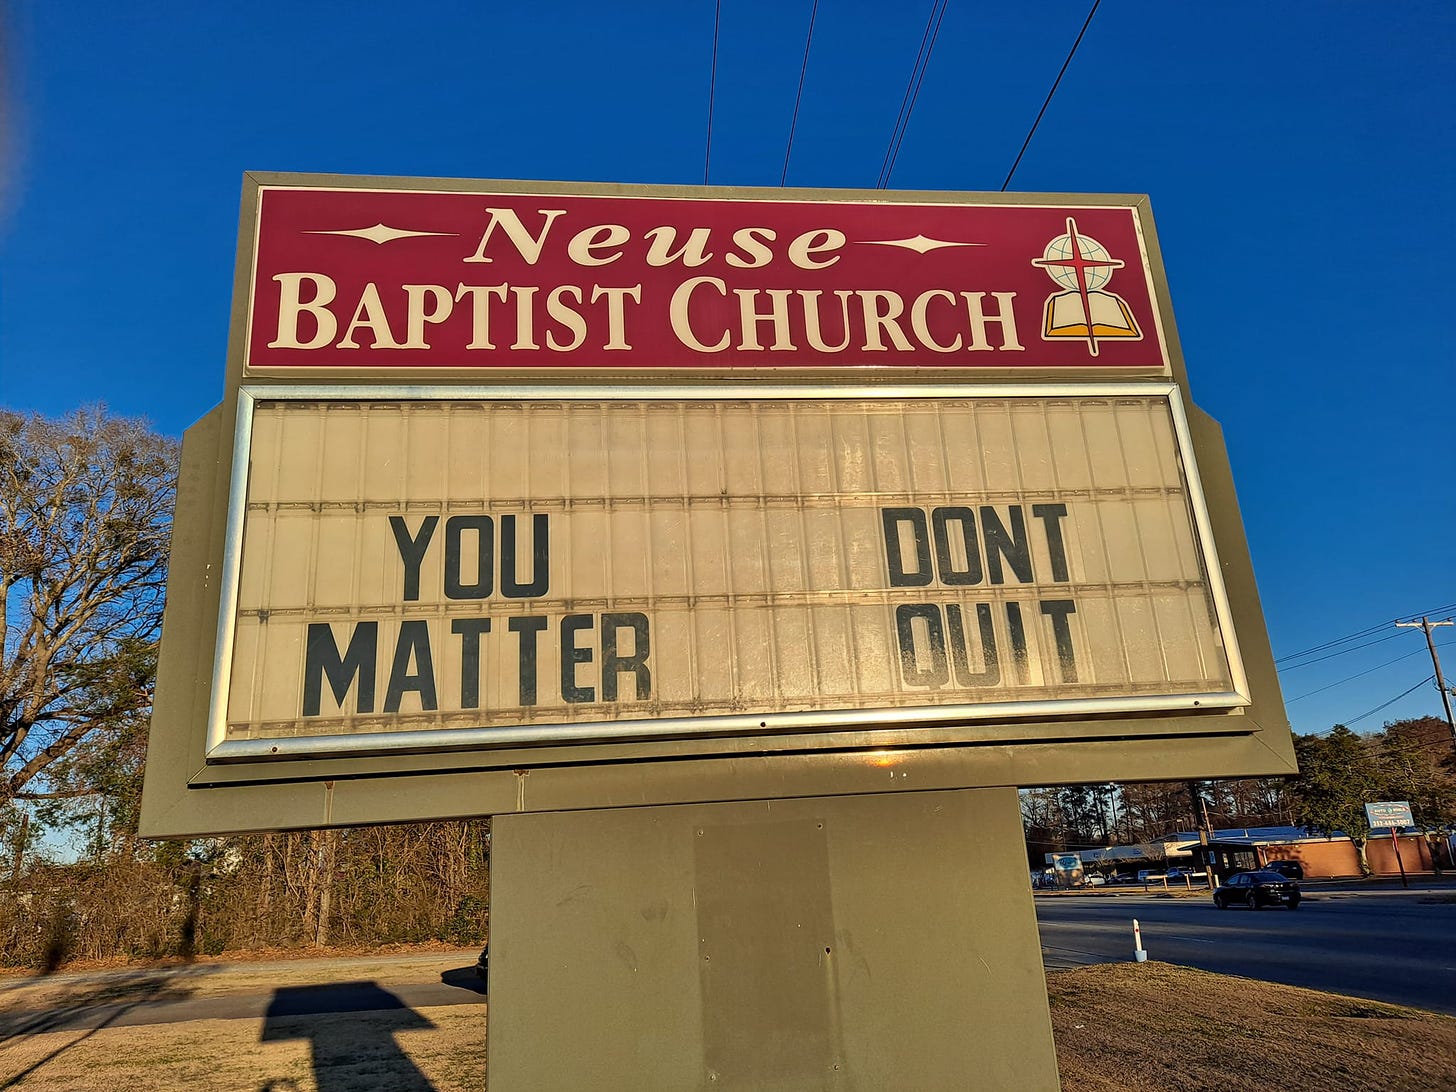 May be an image of outdoors and text that says 'Neuse BAPTIST CHURCH YOU MAT TER DONT QUIT'